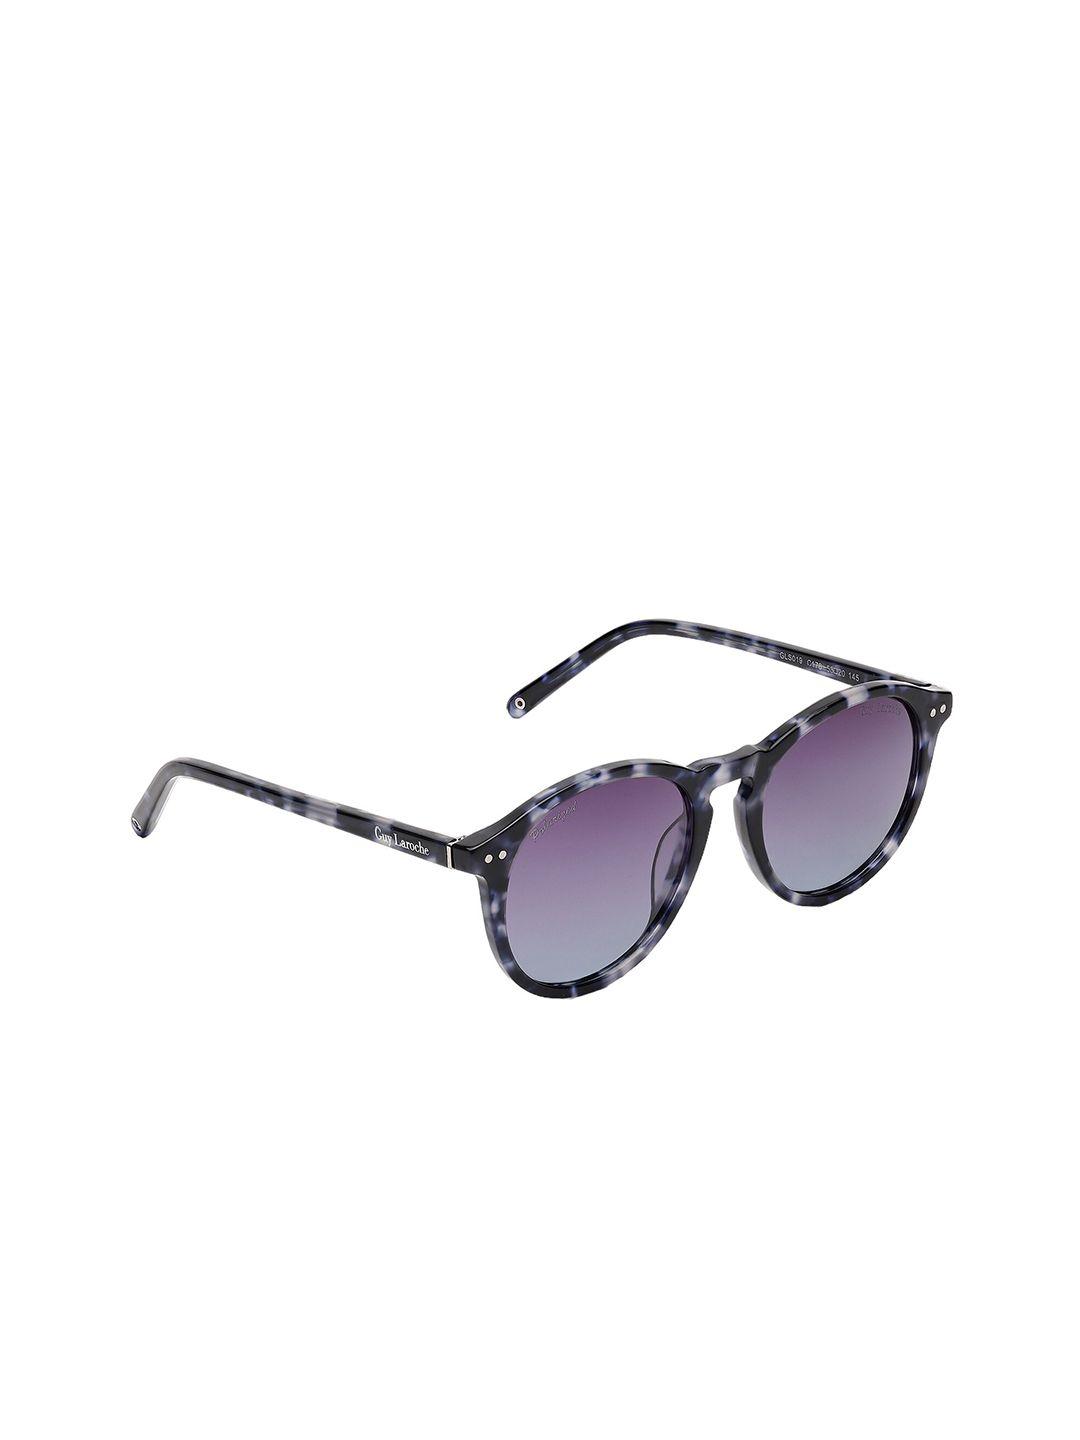 guy laroche unisex oval sunglasses with uv protected lens